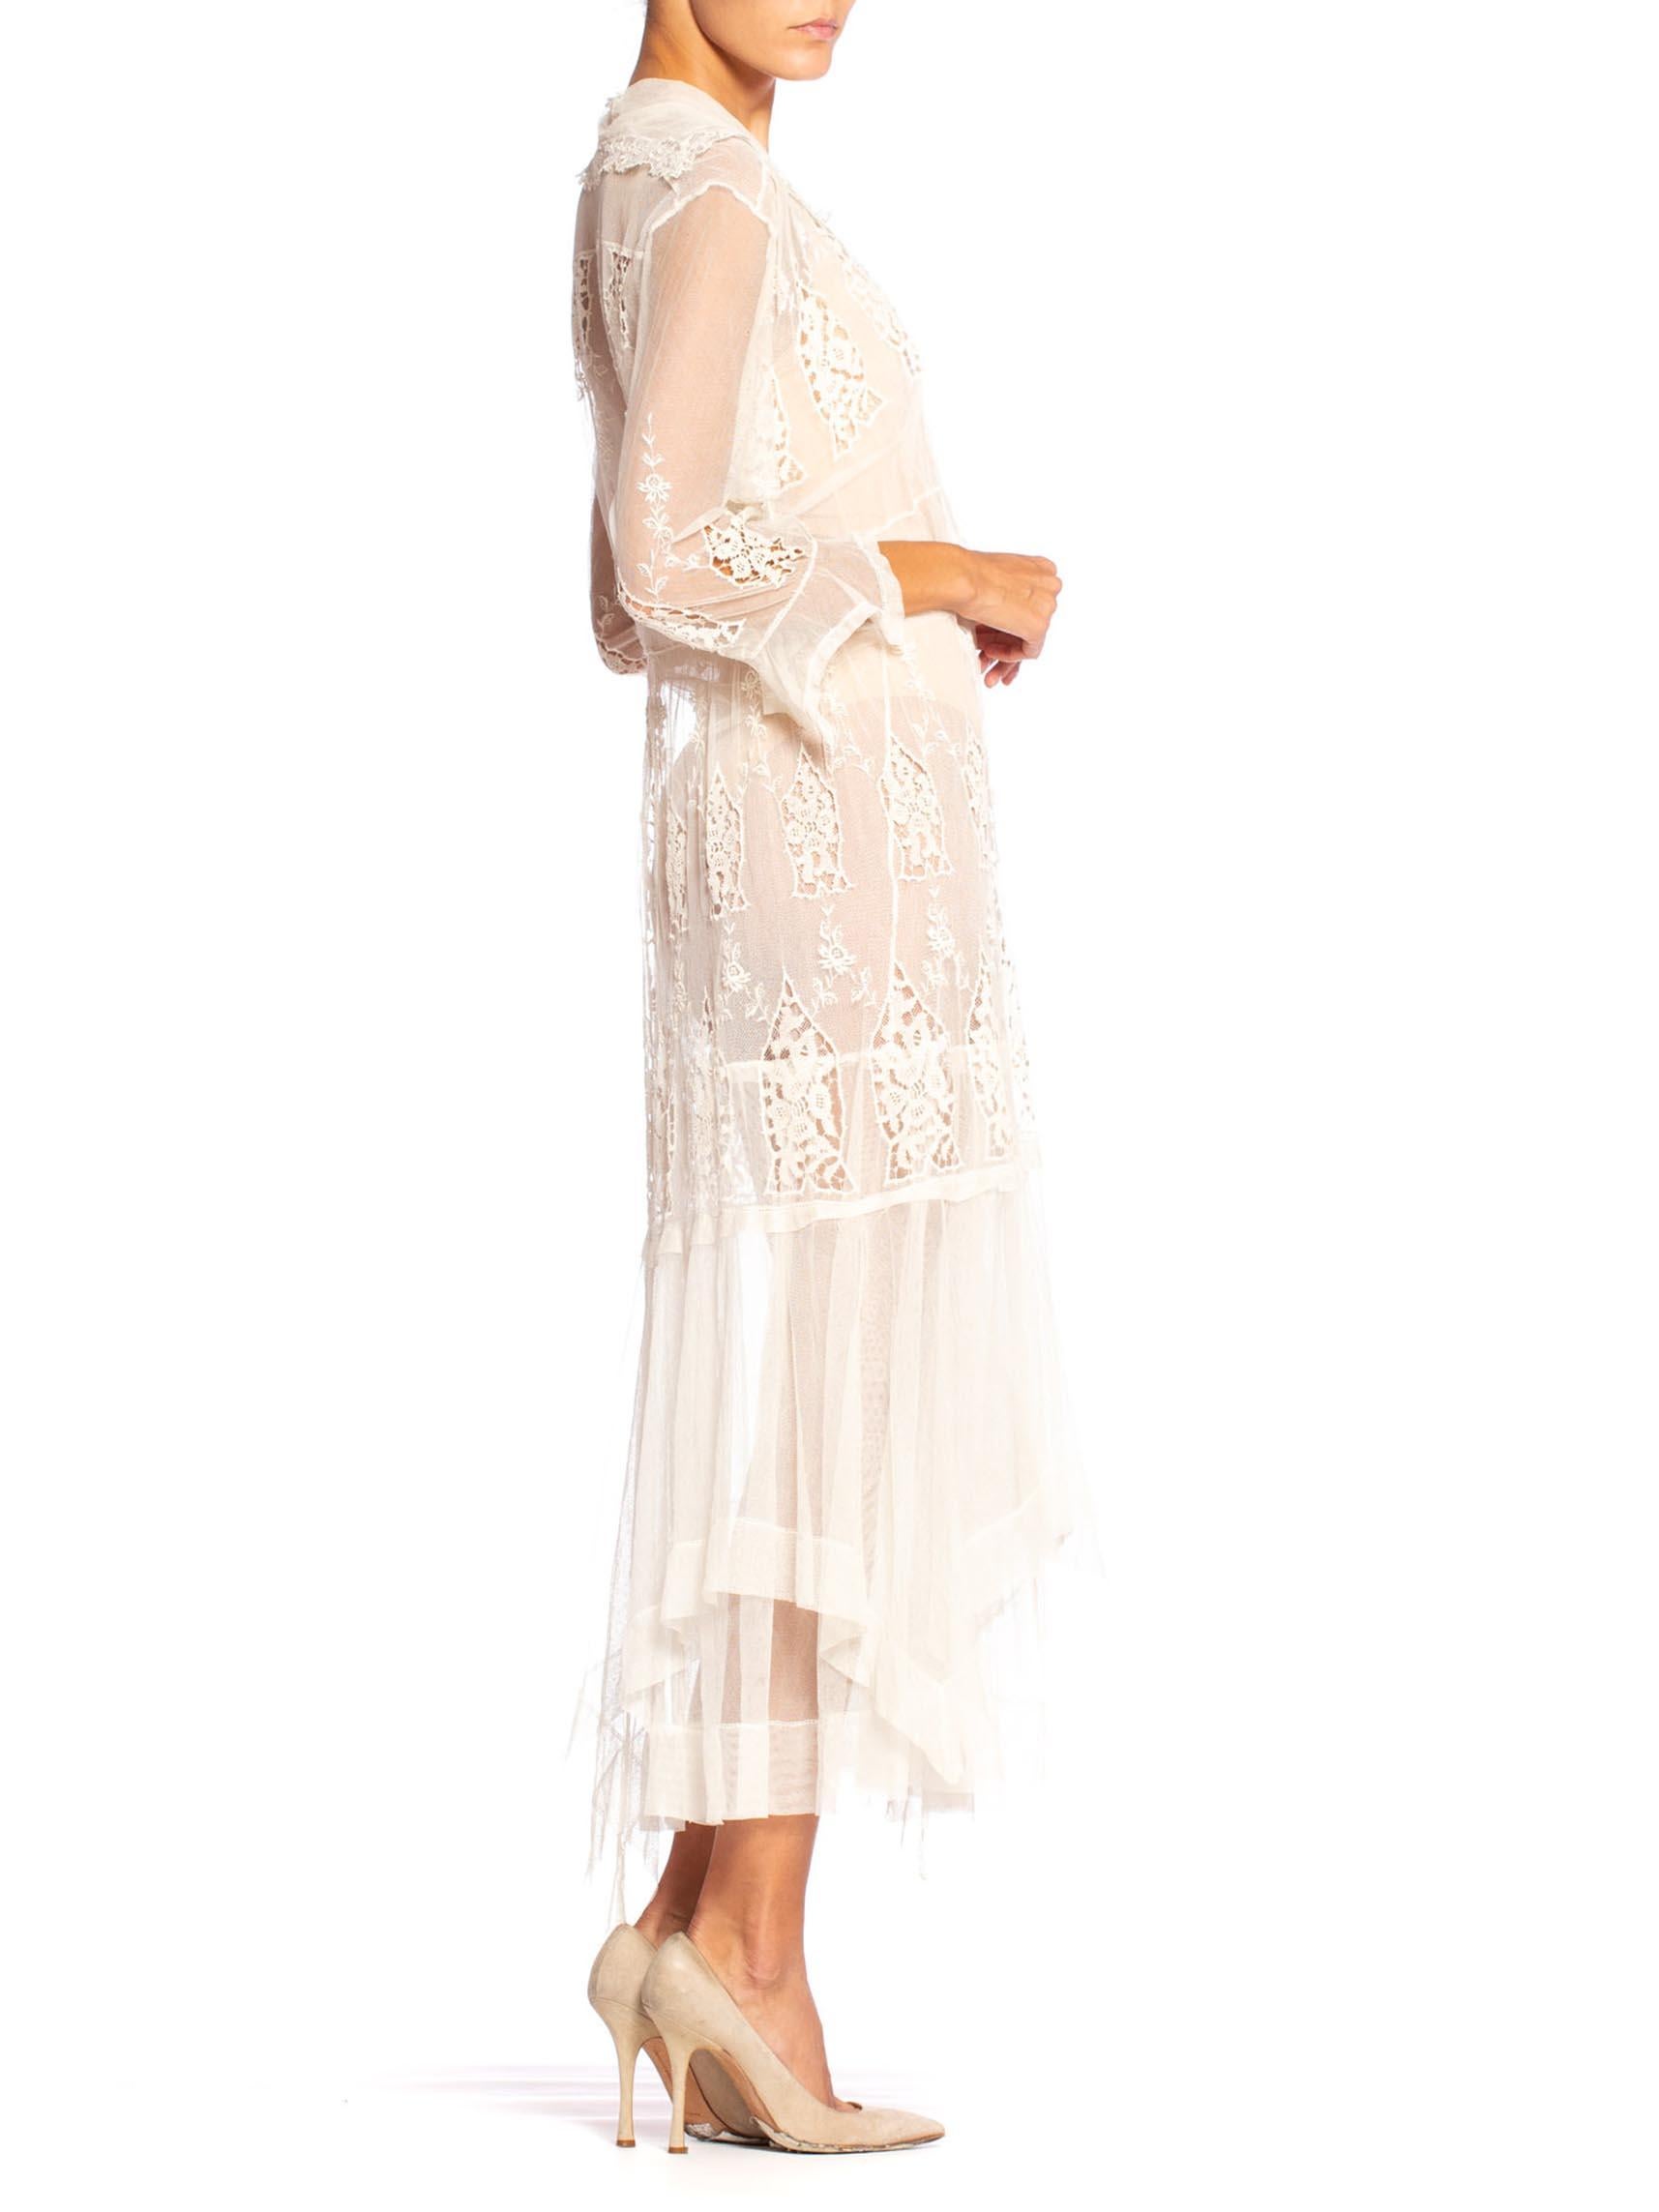 Women's Edwardian Cream Organic Cotton Embroidered Tulle & Lace Dress With Sheer Sleeves